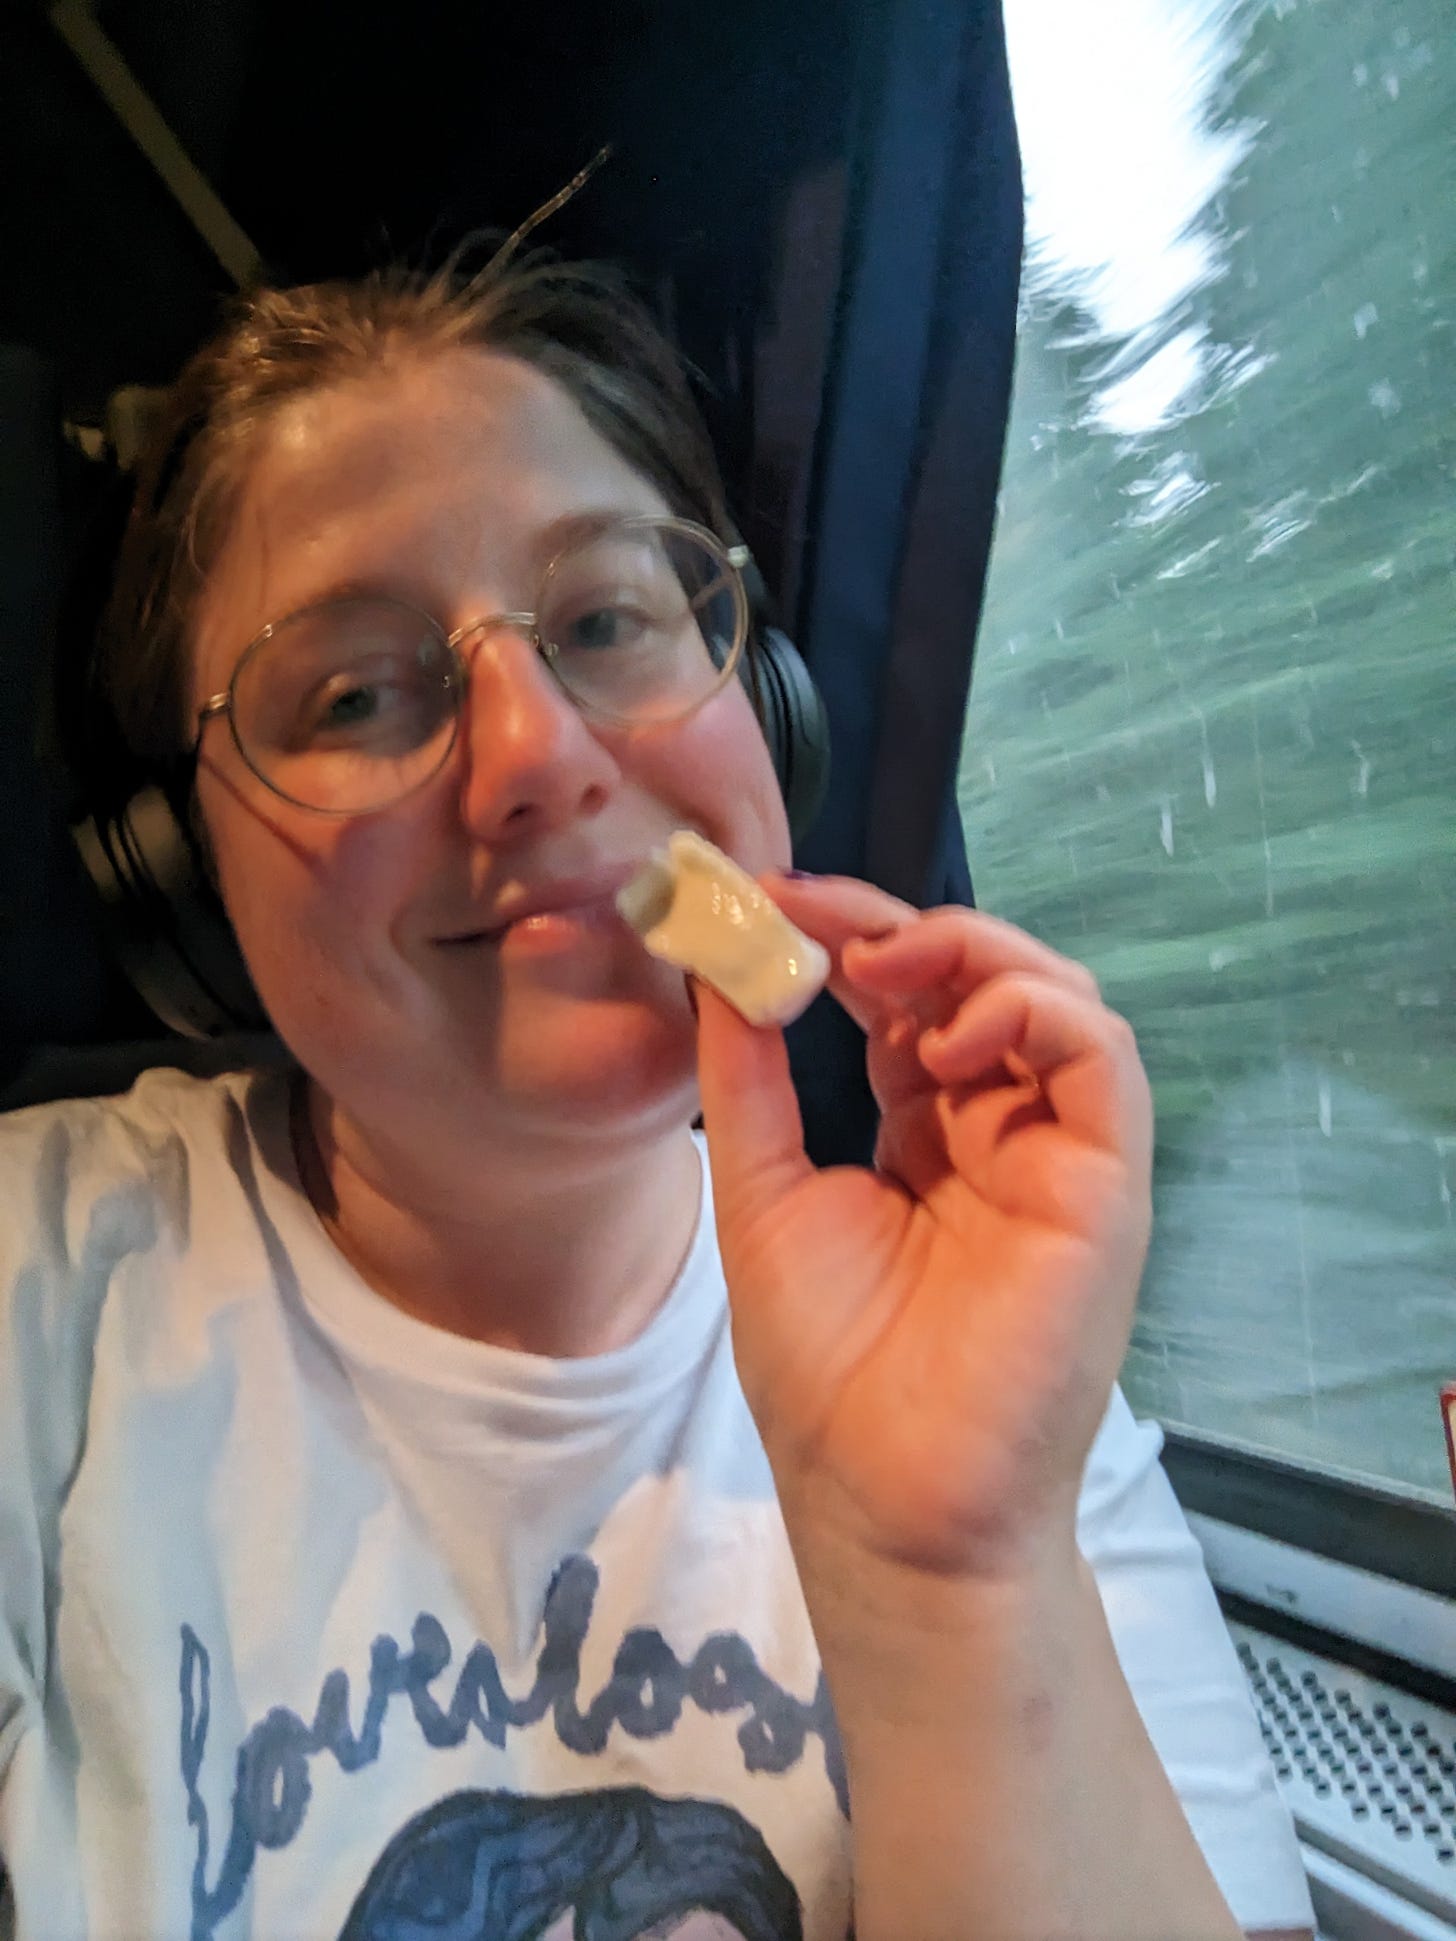 a white woman with brown hair pulled back and round glasses smiles and poses with a half-eated mini brie cheese. She is wearing over-ear headphones and a "loveology" t shirt and sitting next to a train window.